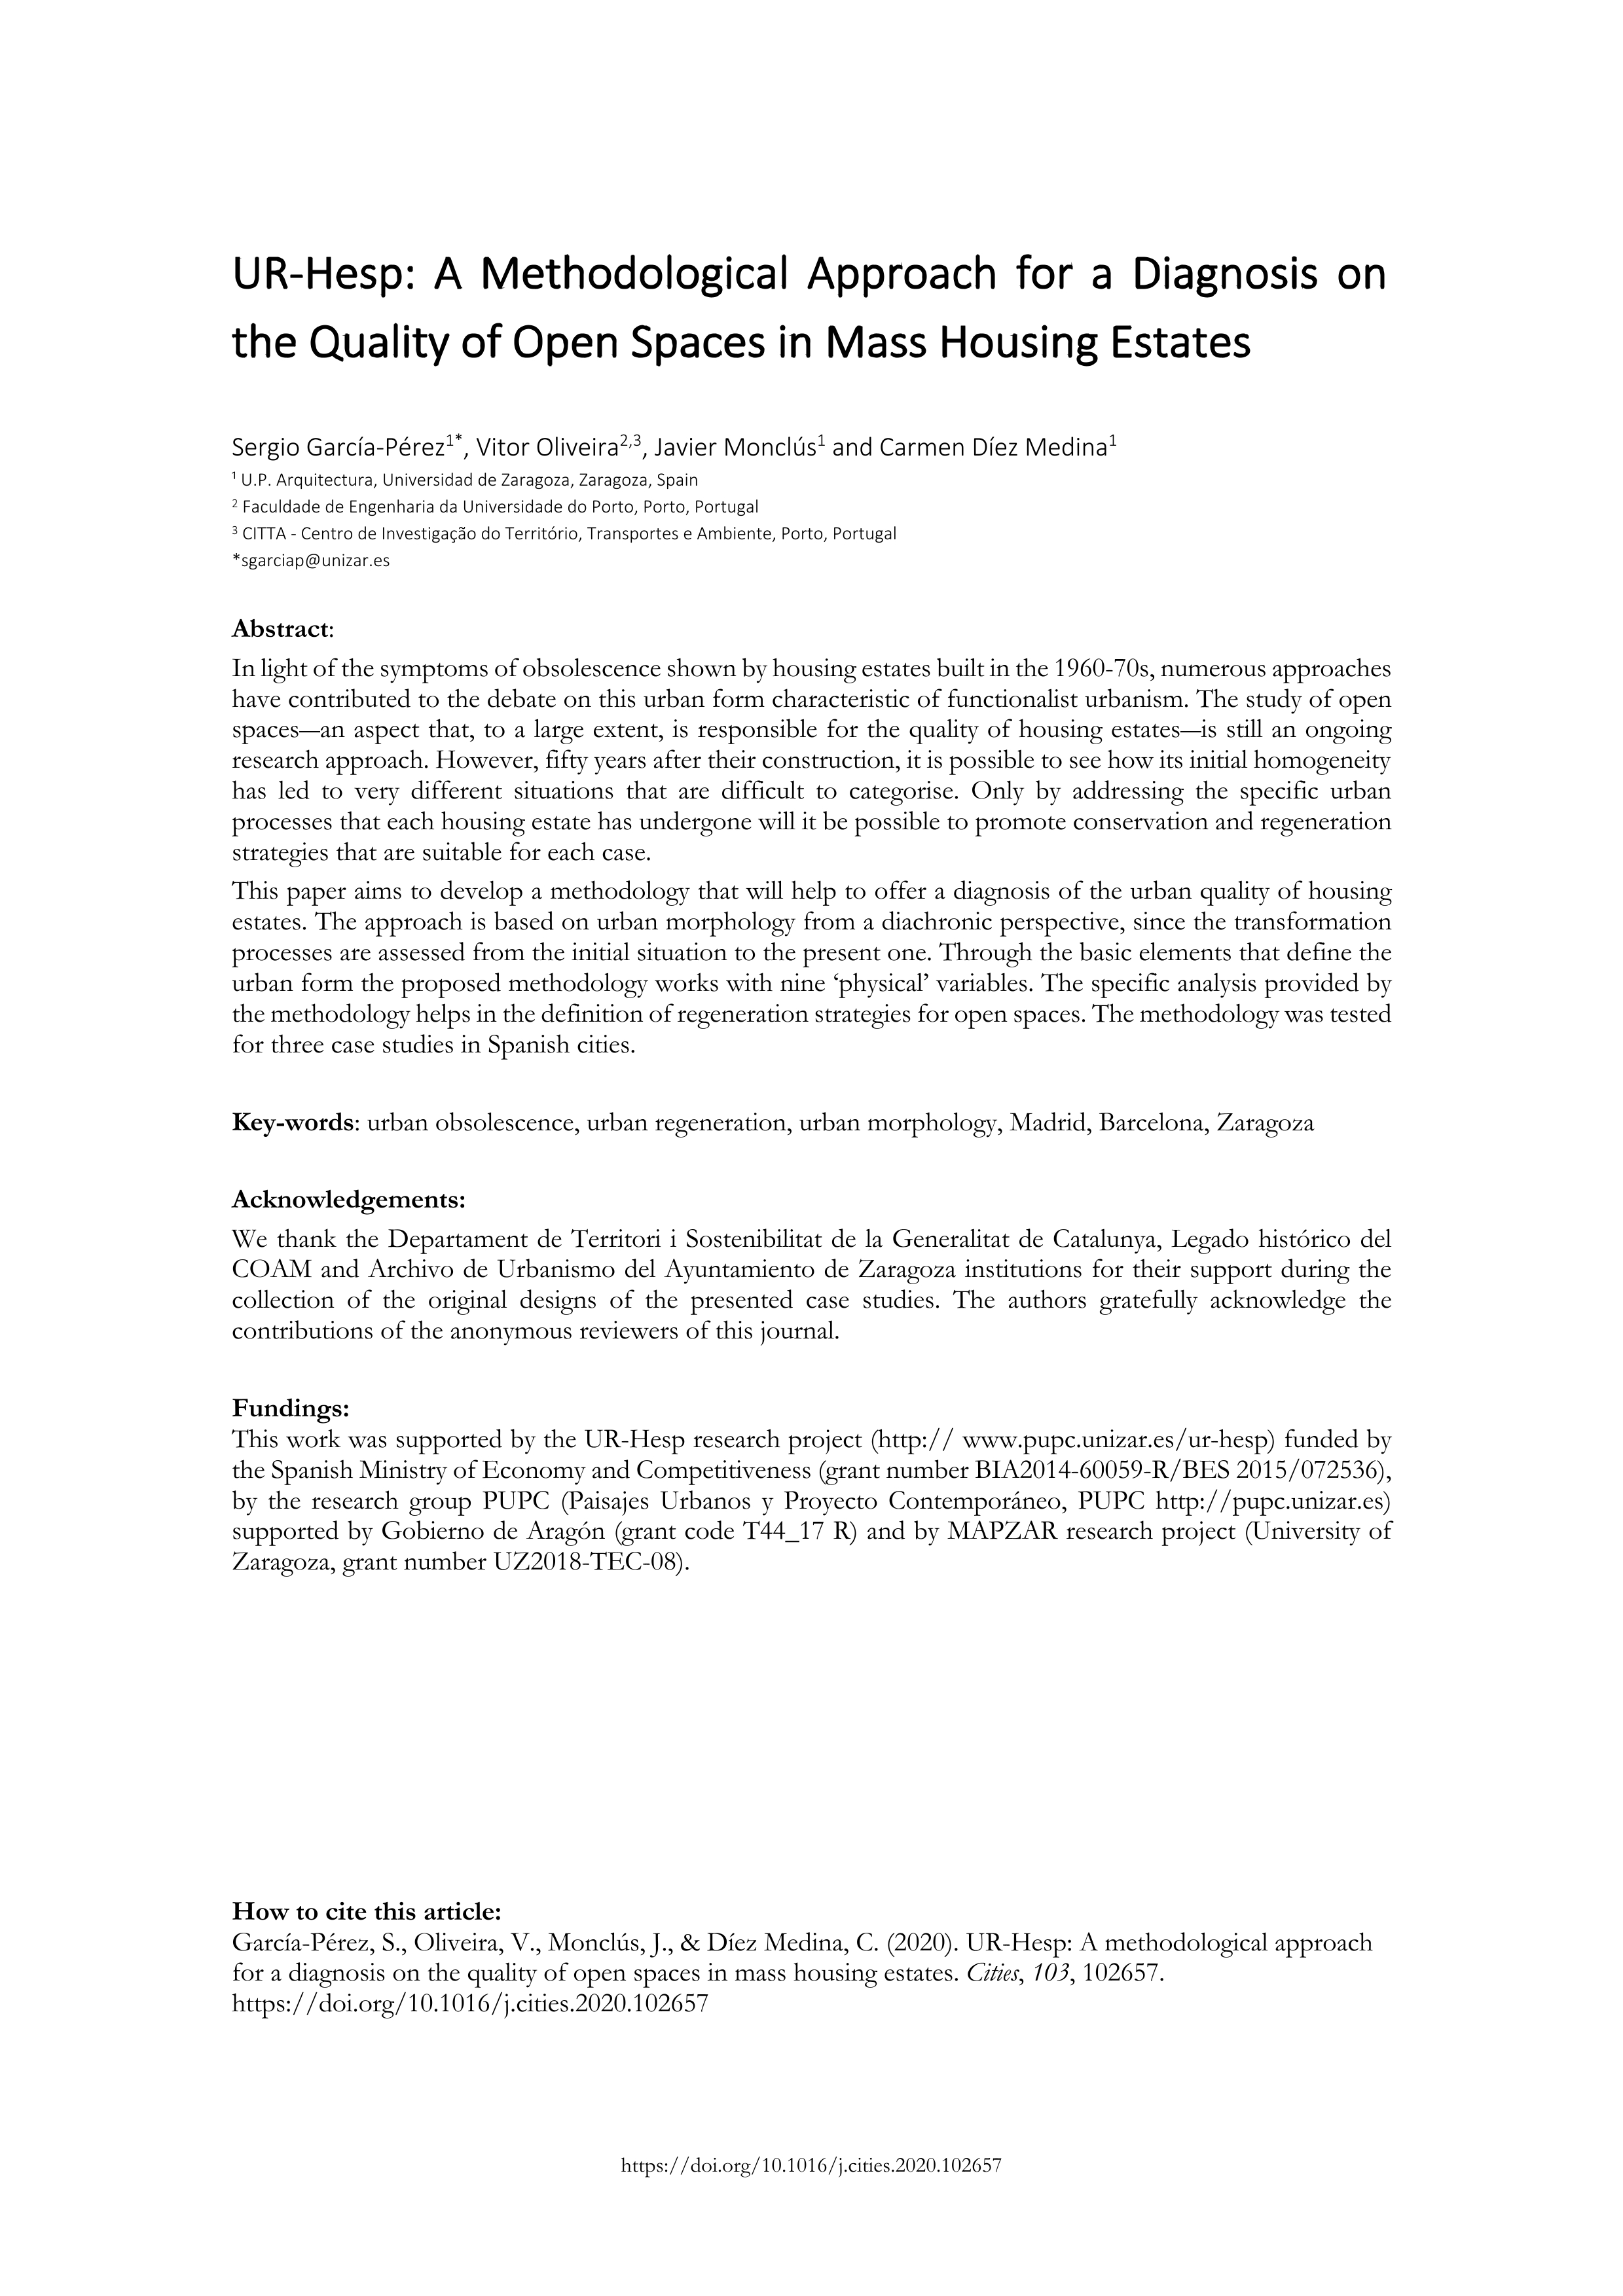 UR-Hesp: A methodological approach for a diagnosis on the quality of open spaces in mass housing estates